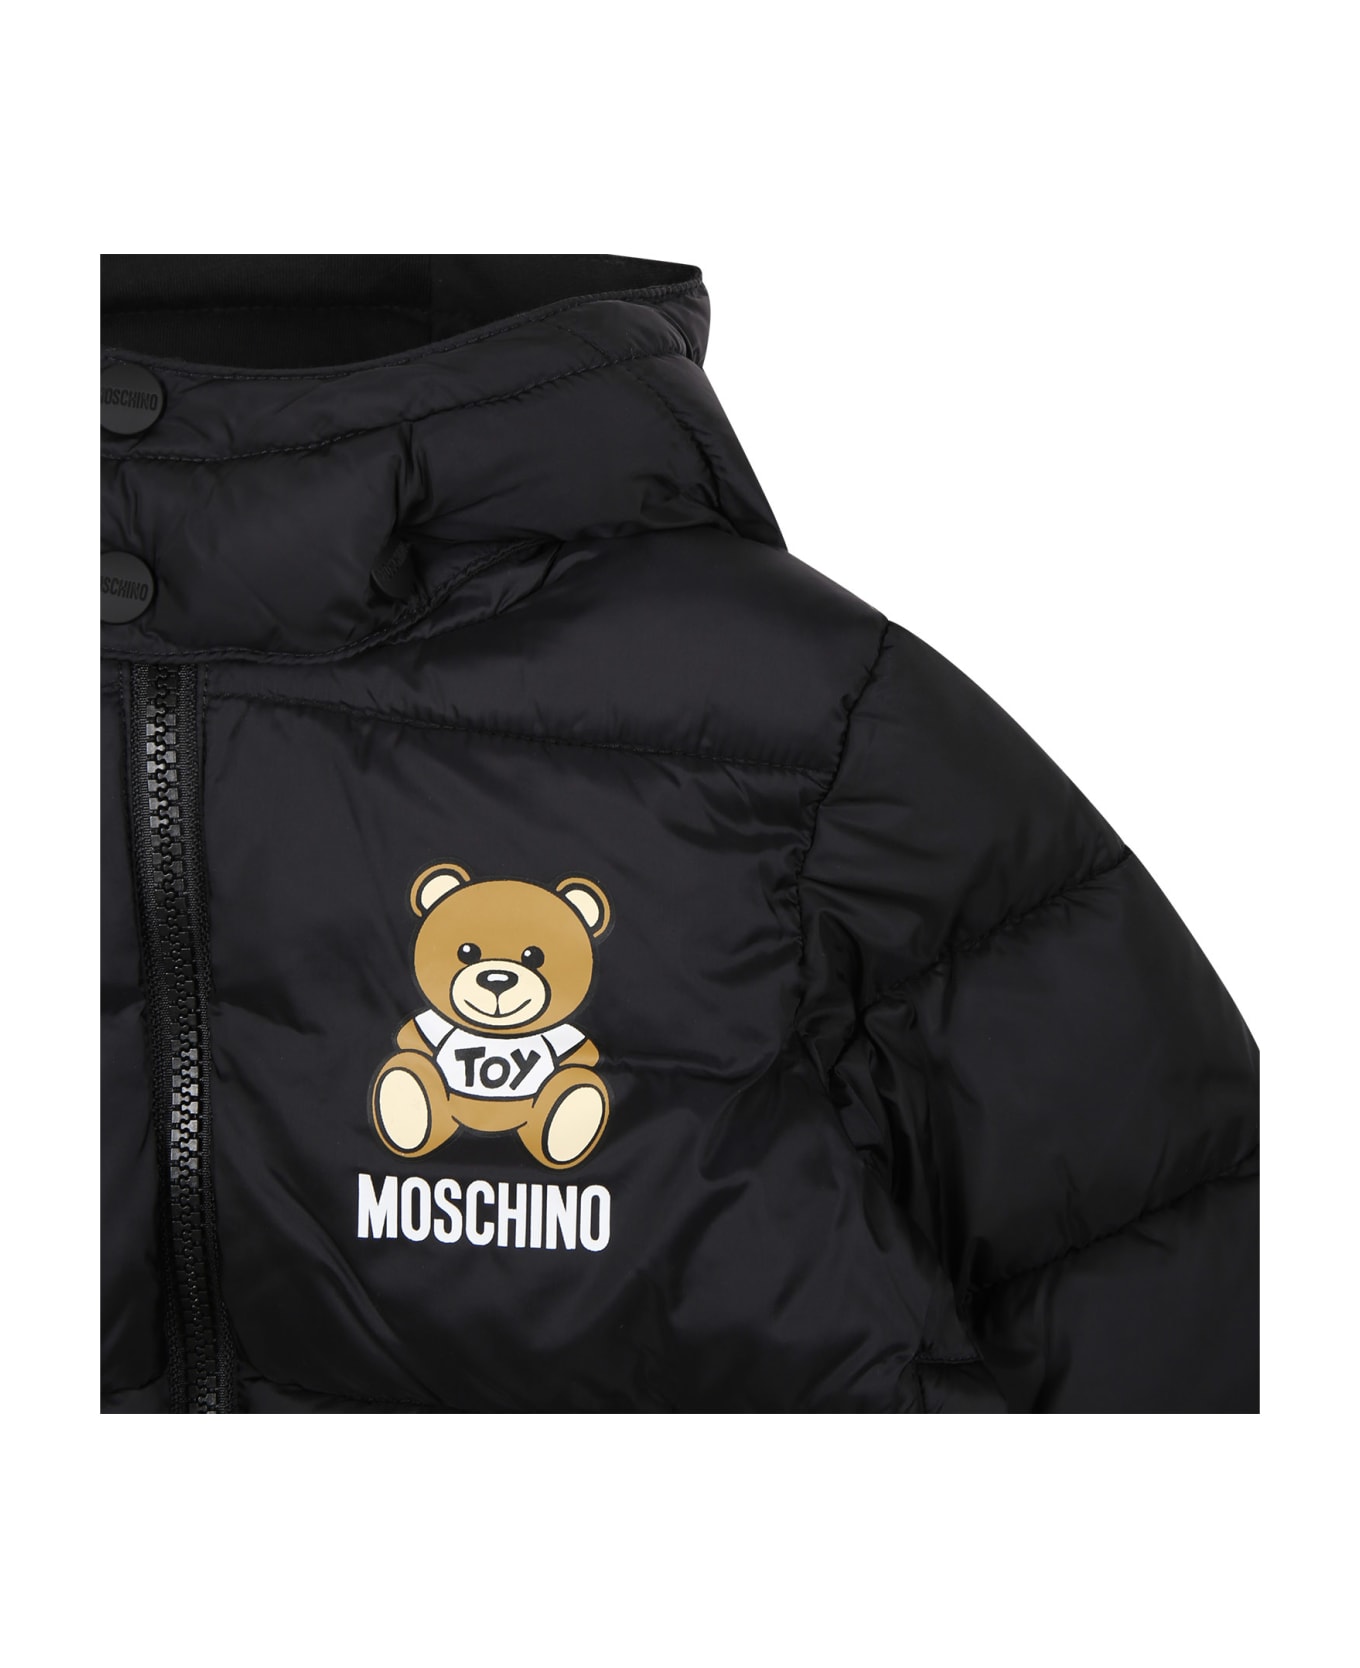 Moschino Black Down Jacket For Babies With Teddy Bear And Logo - Black